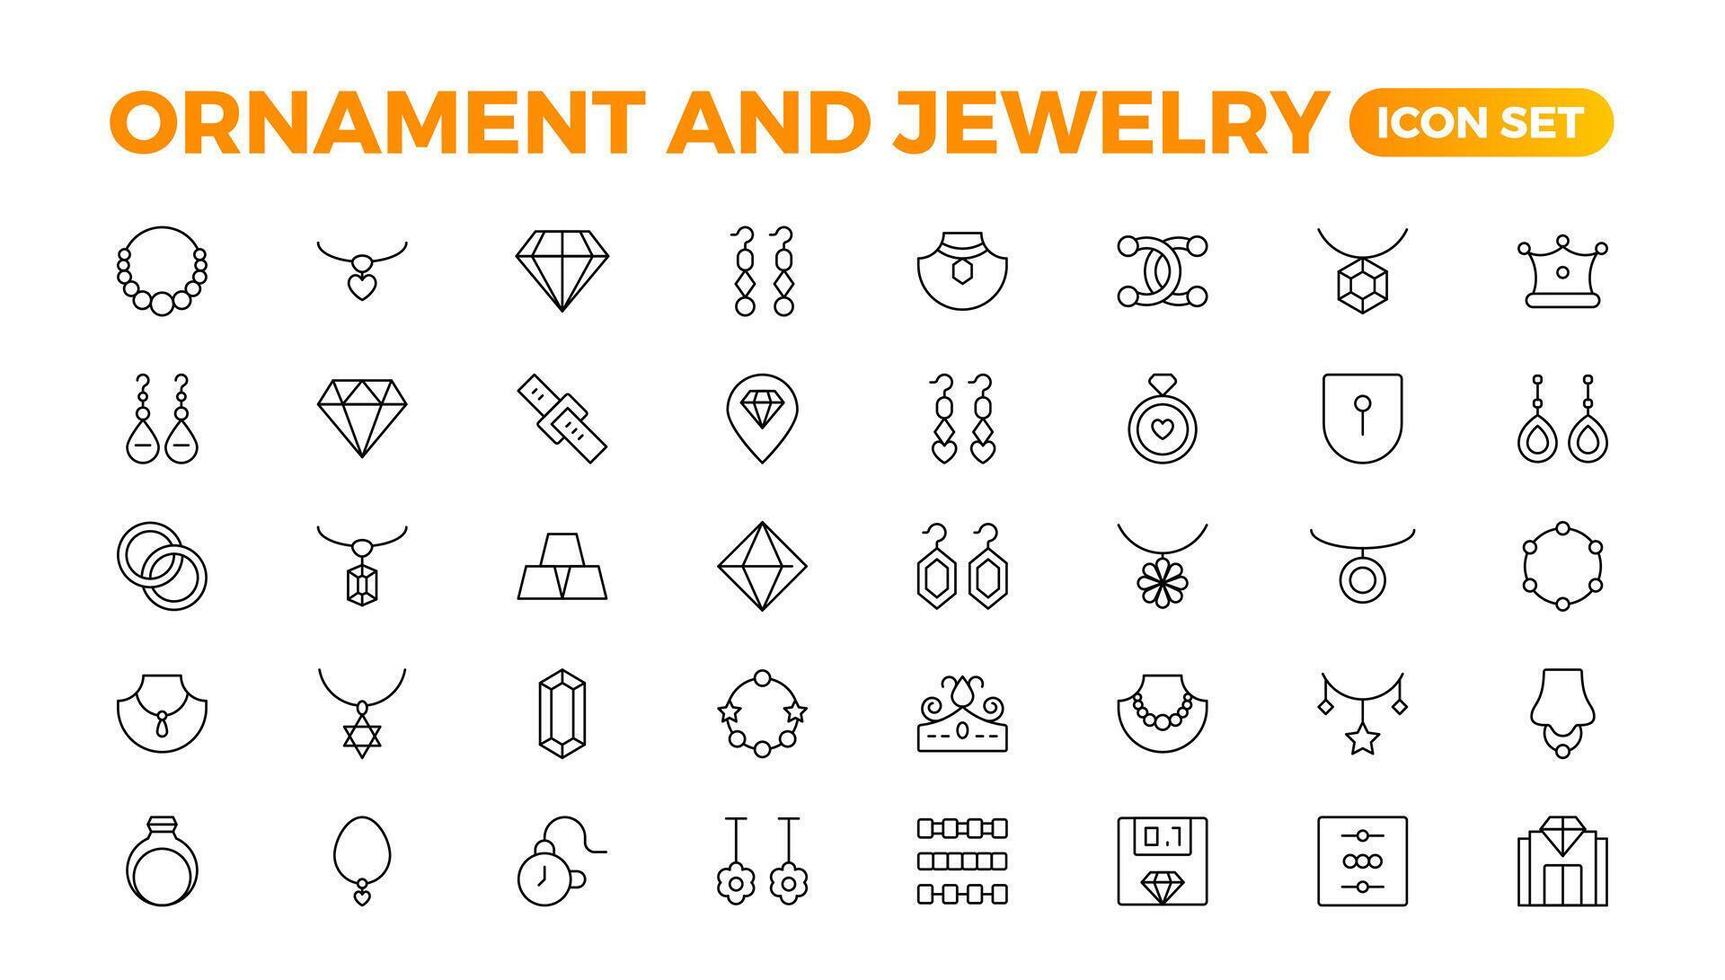 Ornament and Jewelry icon set . Simple Set of Jewelry Related Vector Line Icons. Contains such Icons as Earrings, Body Crosses, and Engagement rings. Outline icon collection.